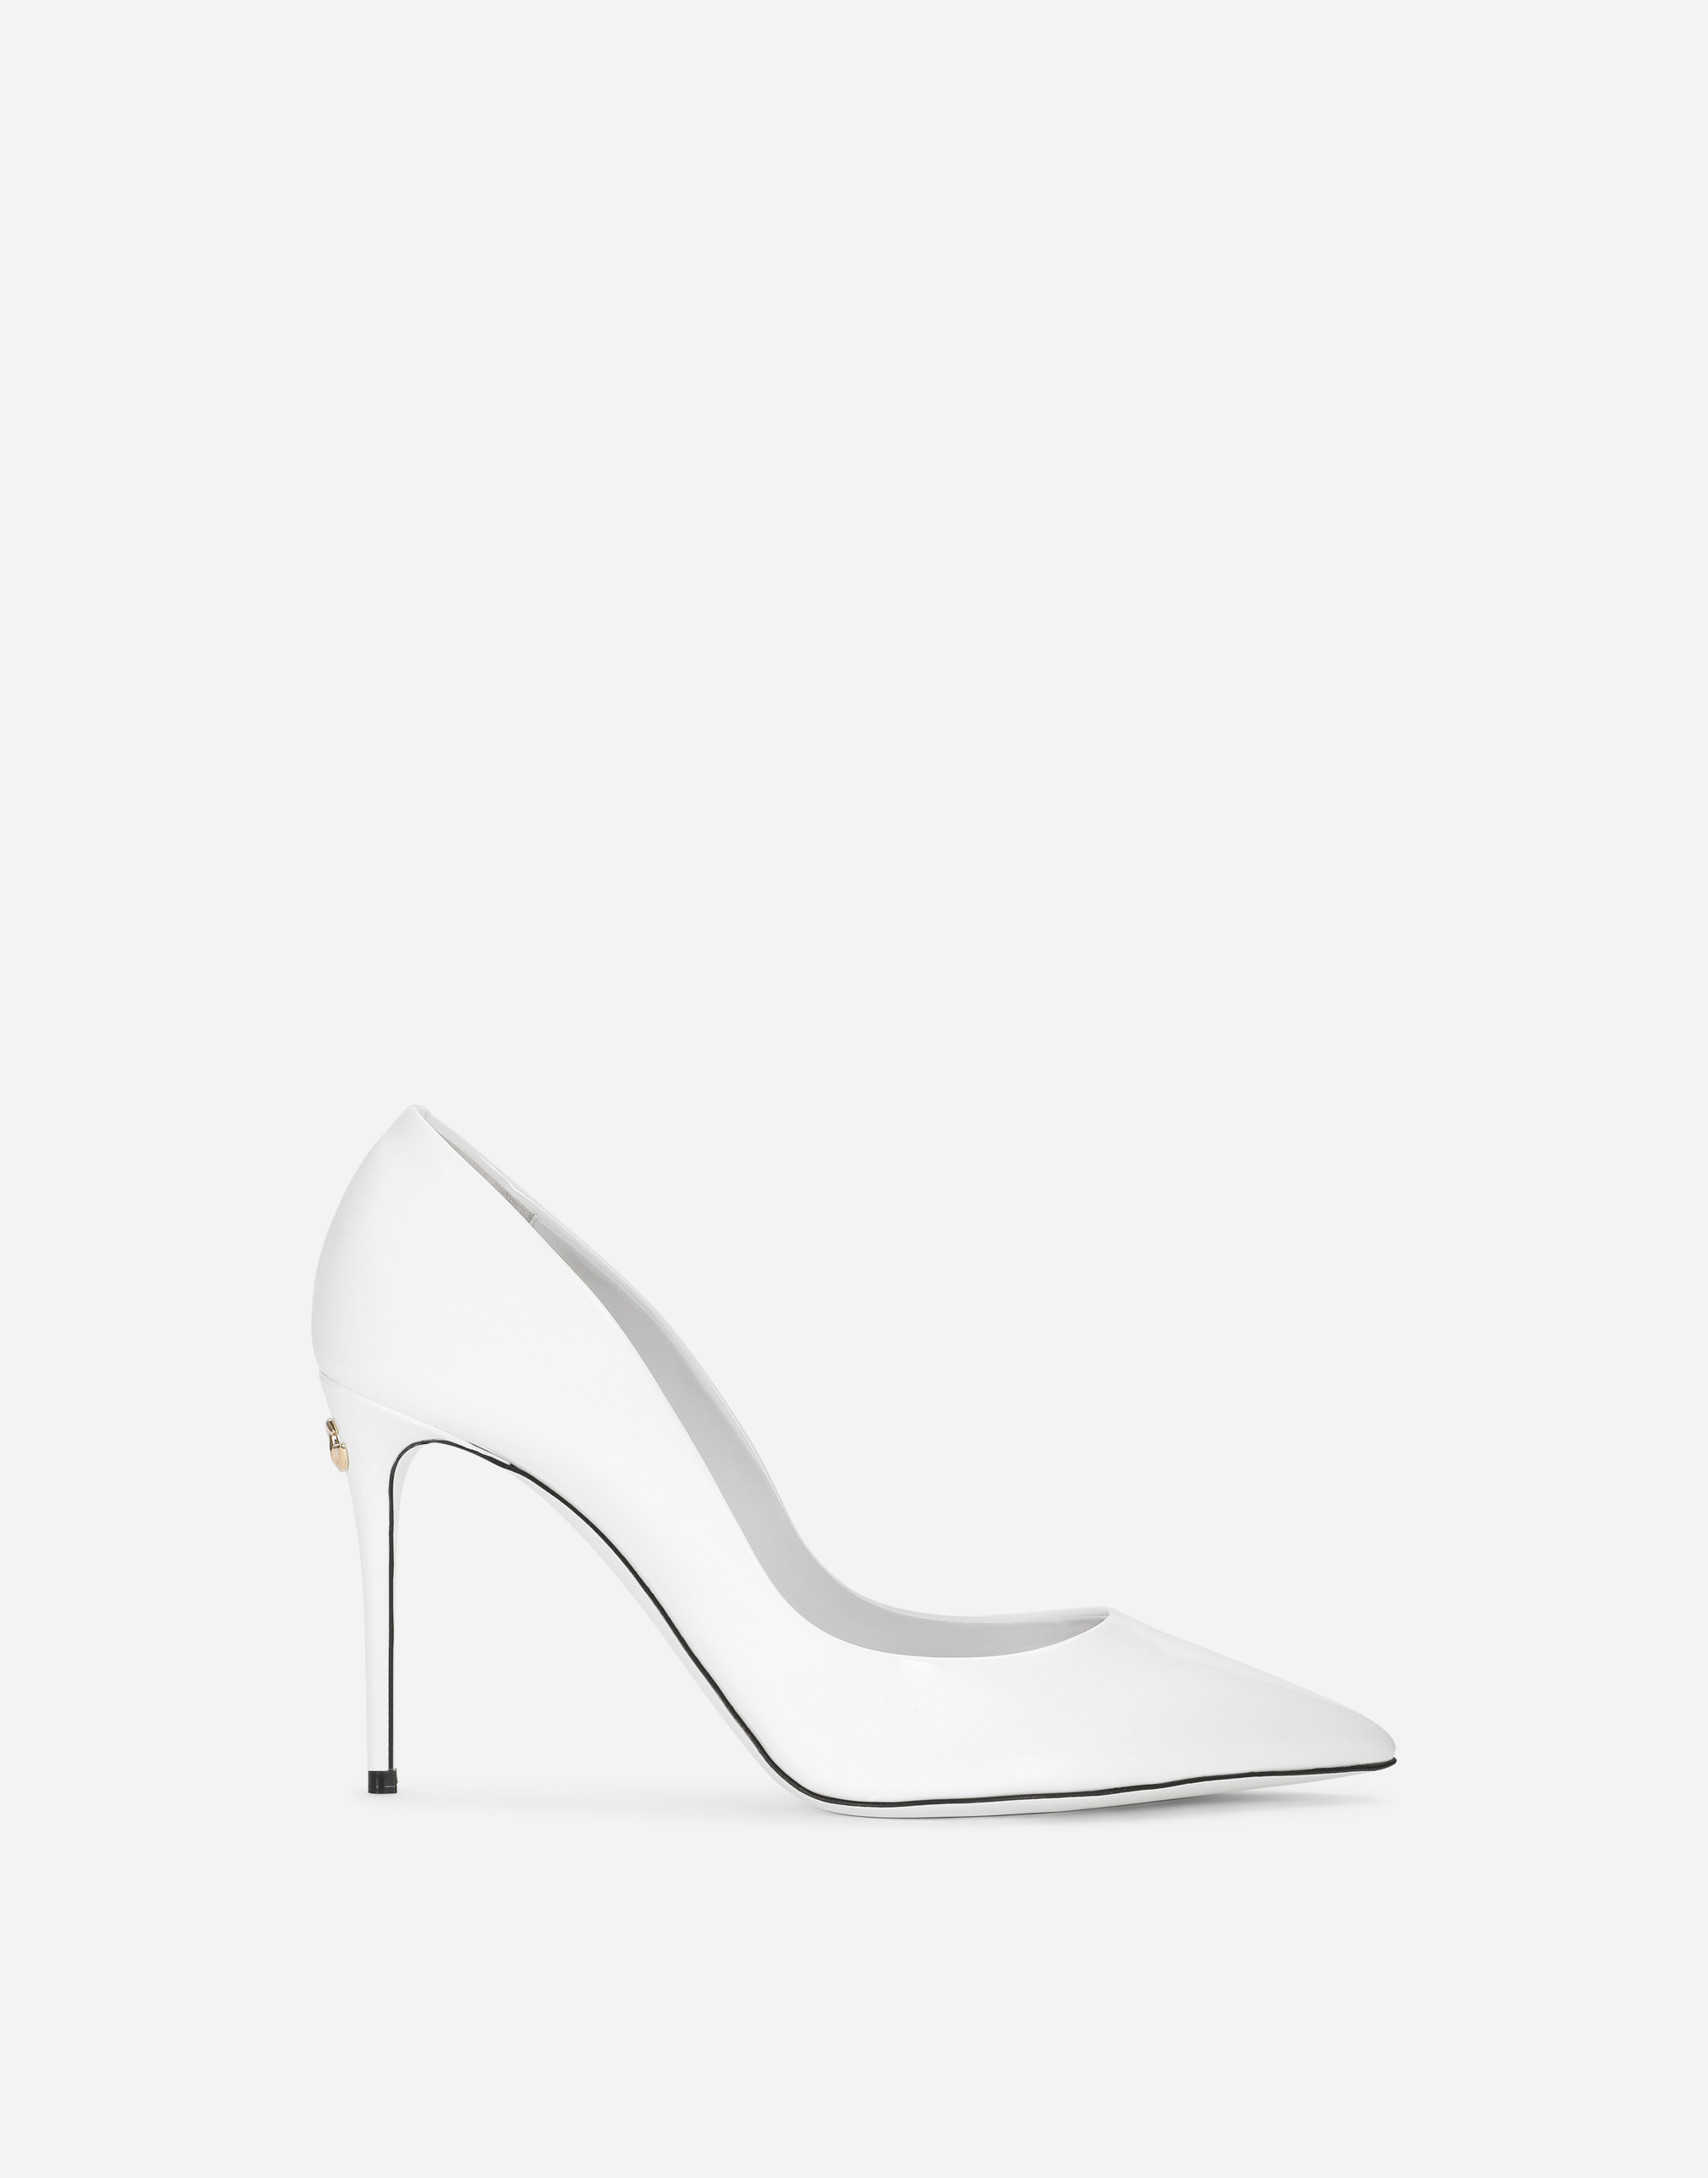 Patent leather Cardinale pumps in White